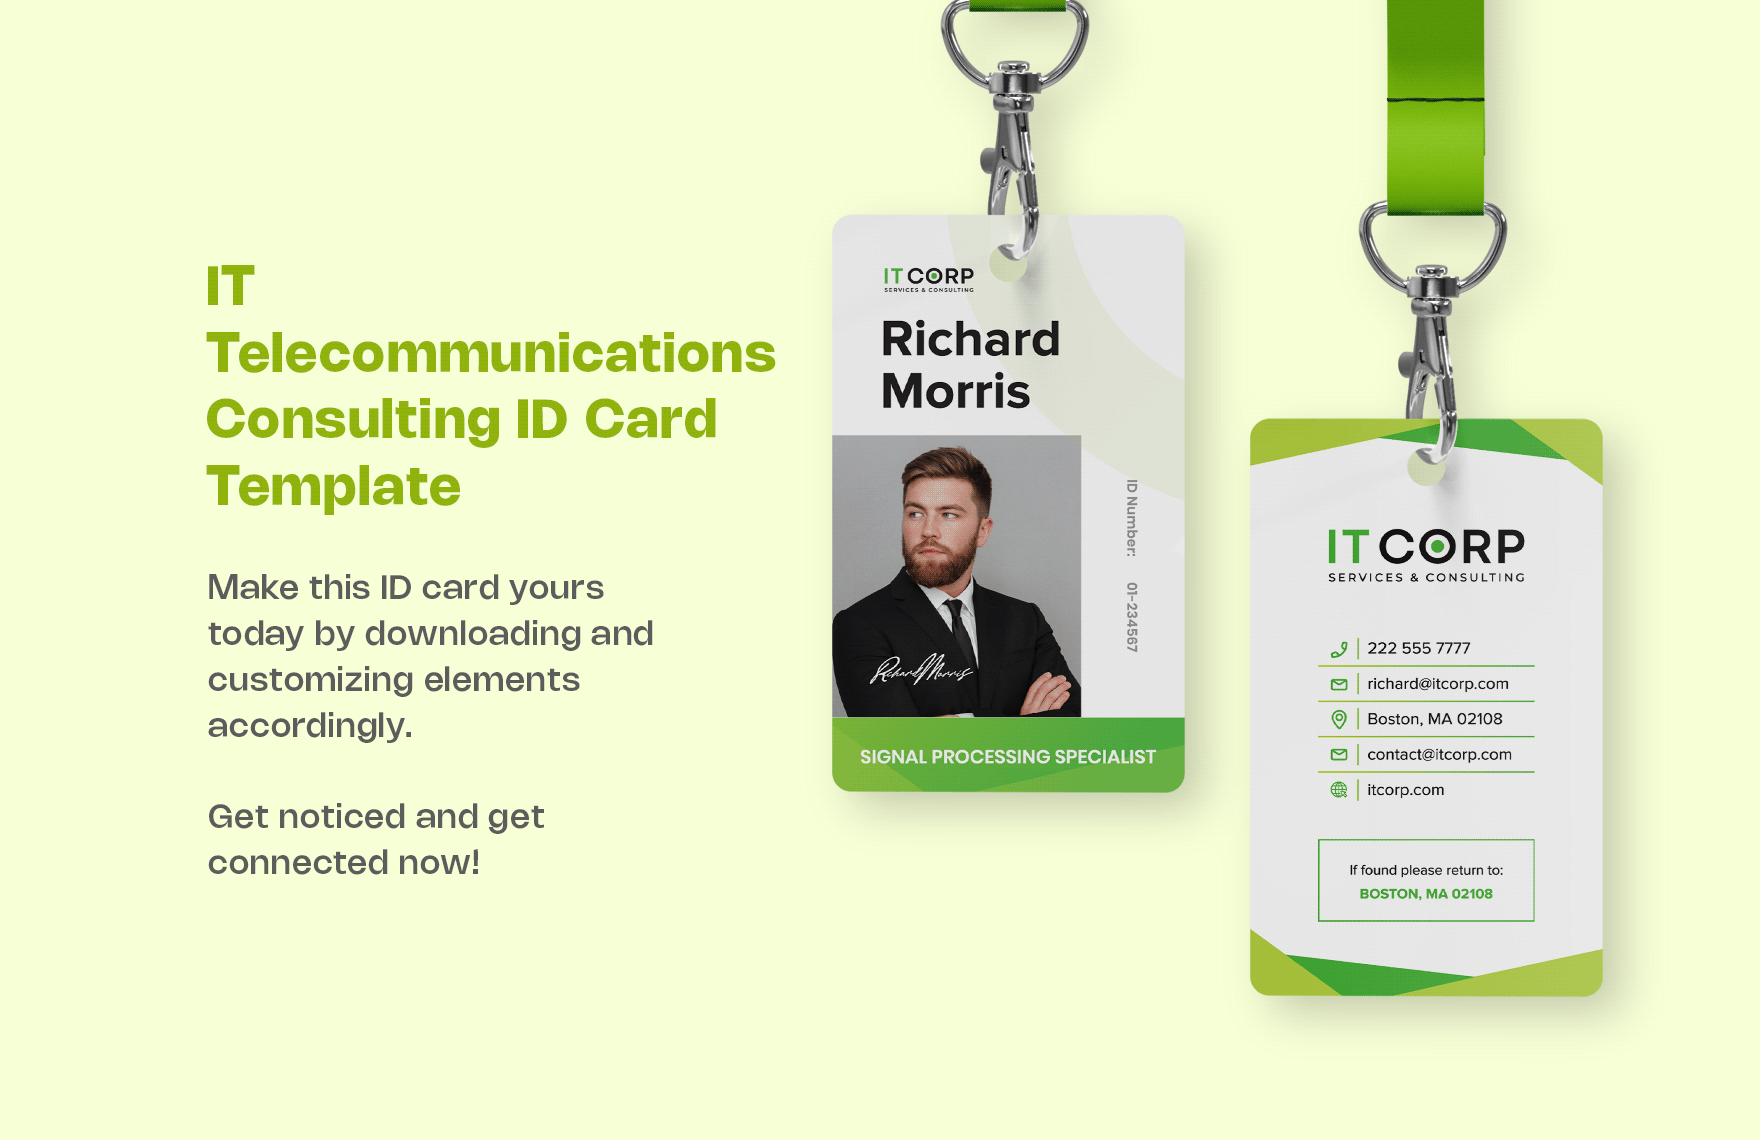 IT Telecommunications Consulting ID Card Template in Word, Illustrator, PSD